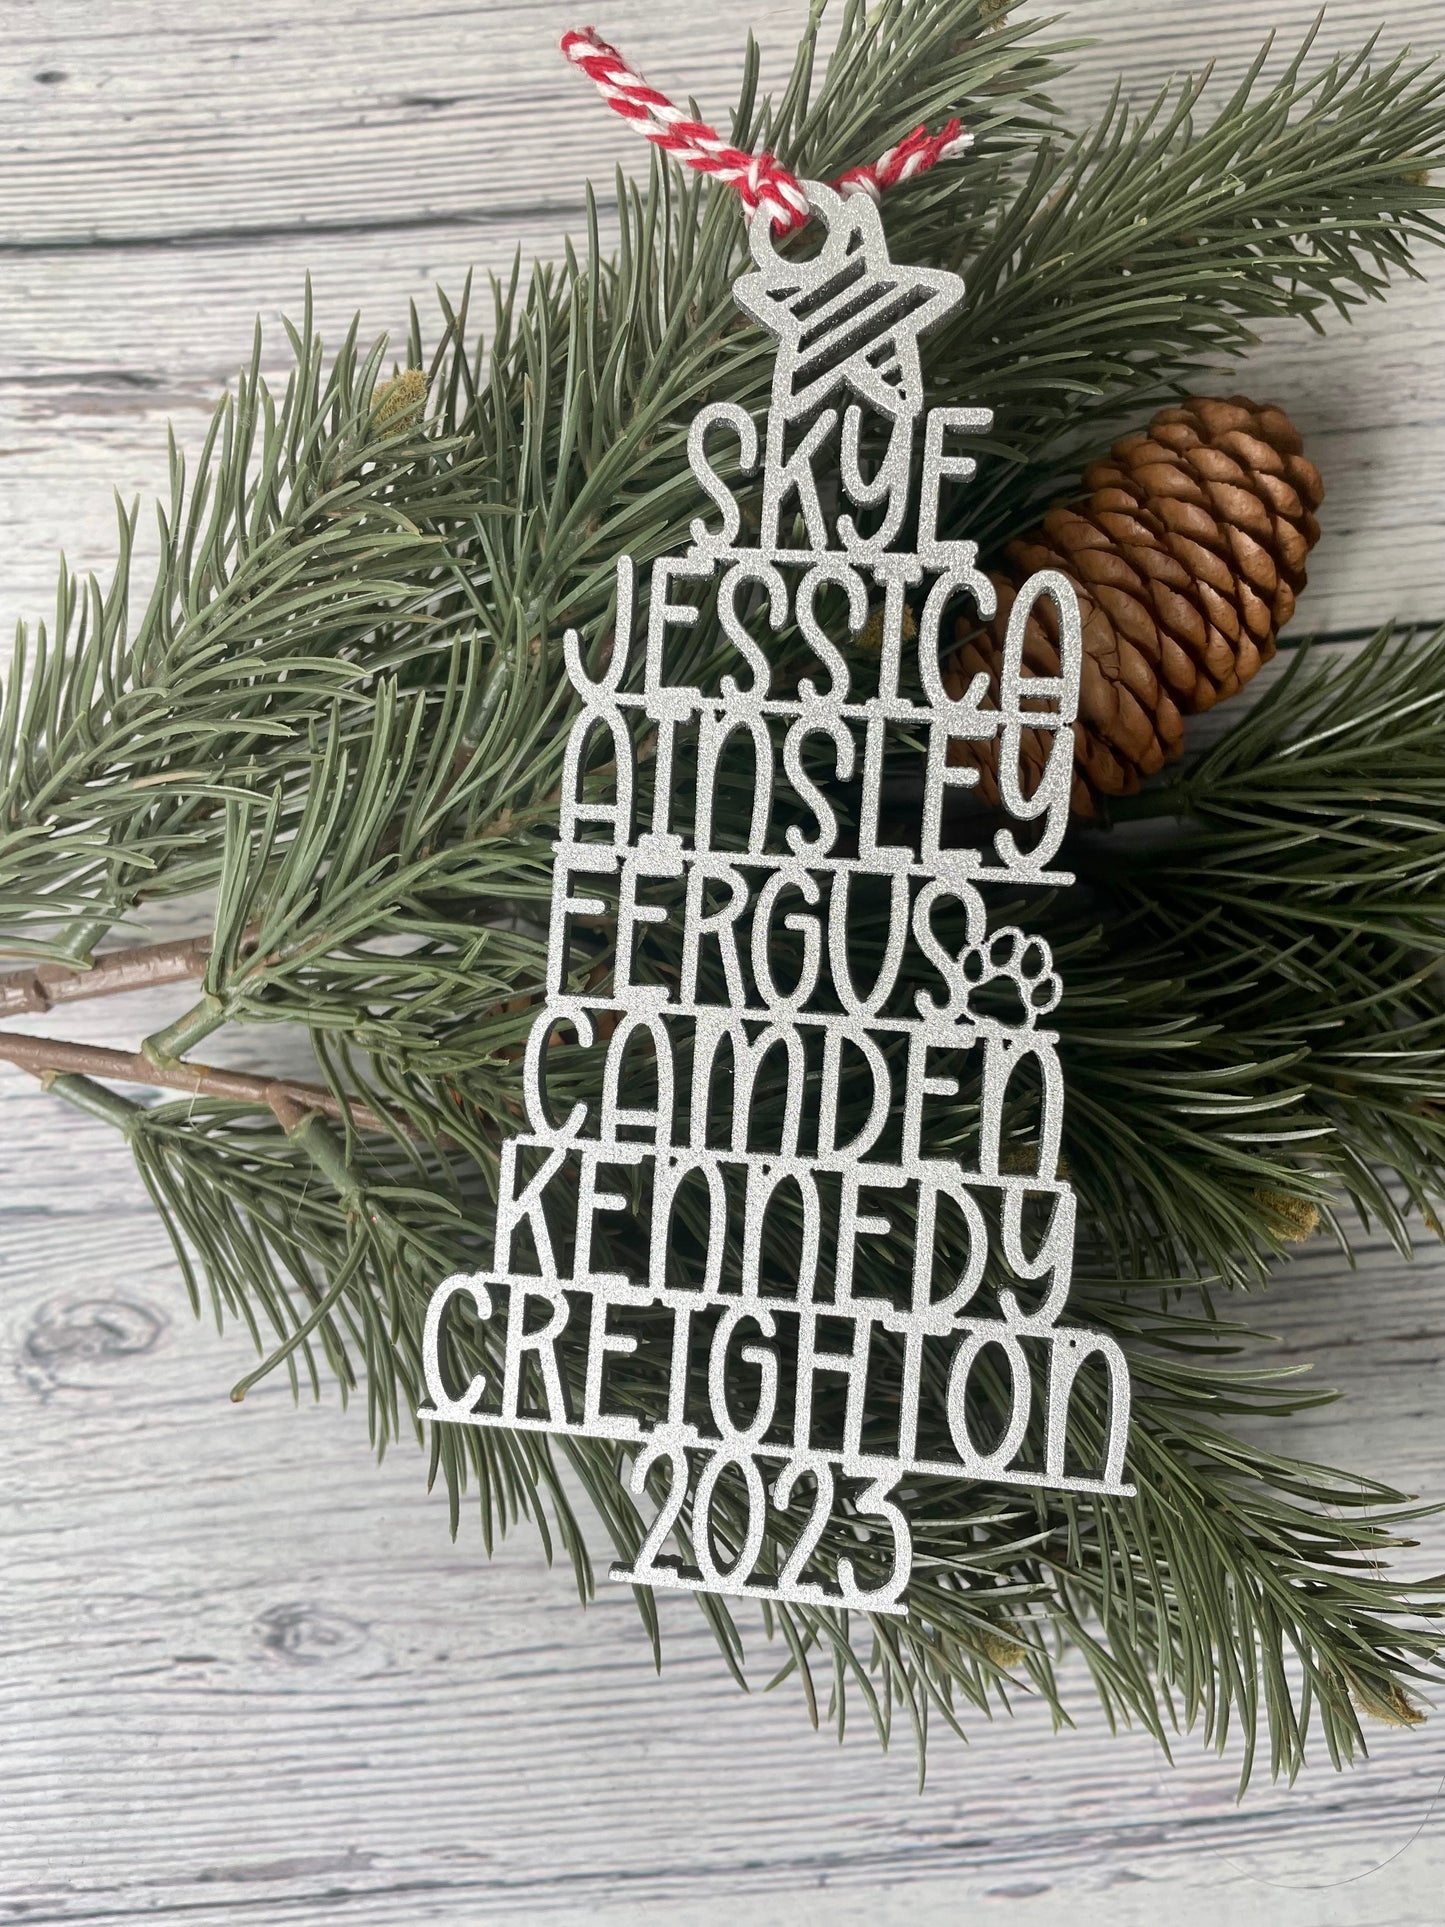 Personalized Family Names Tree Ornament